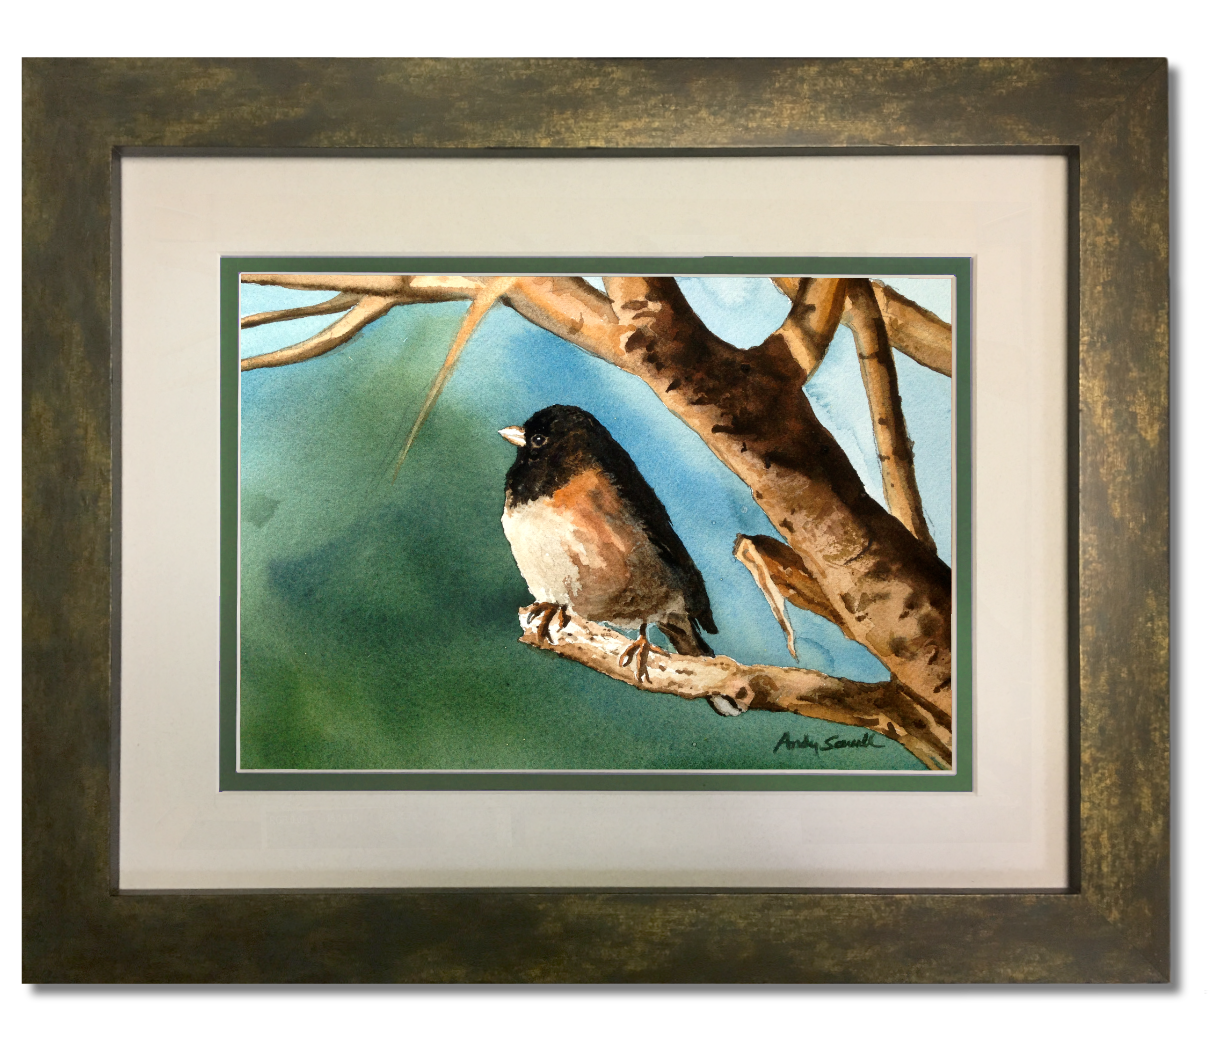 "J is for Junco" Original 8x12 or framed 11x14 watercolor or giclee print